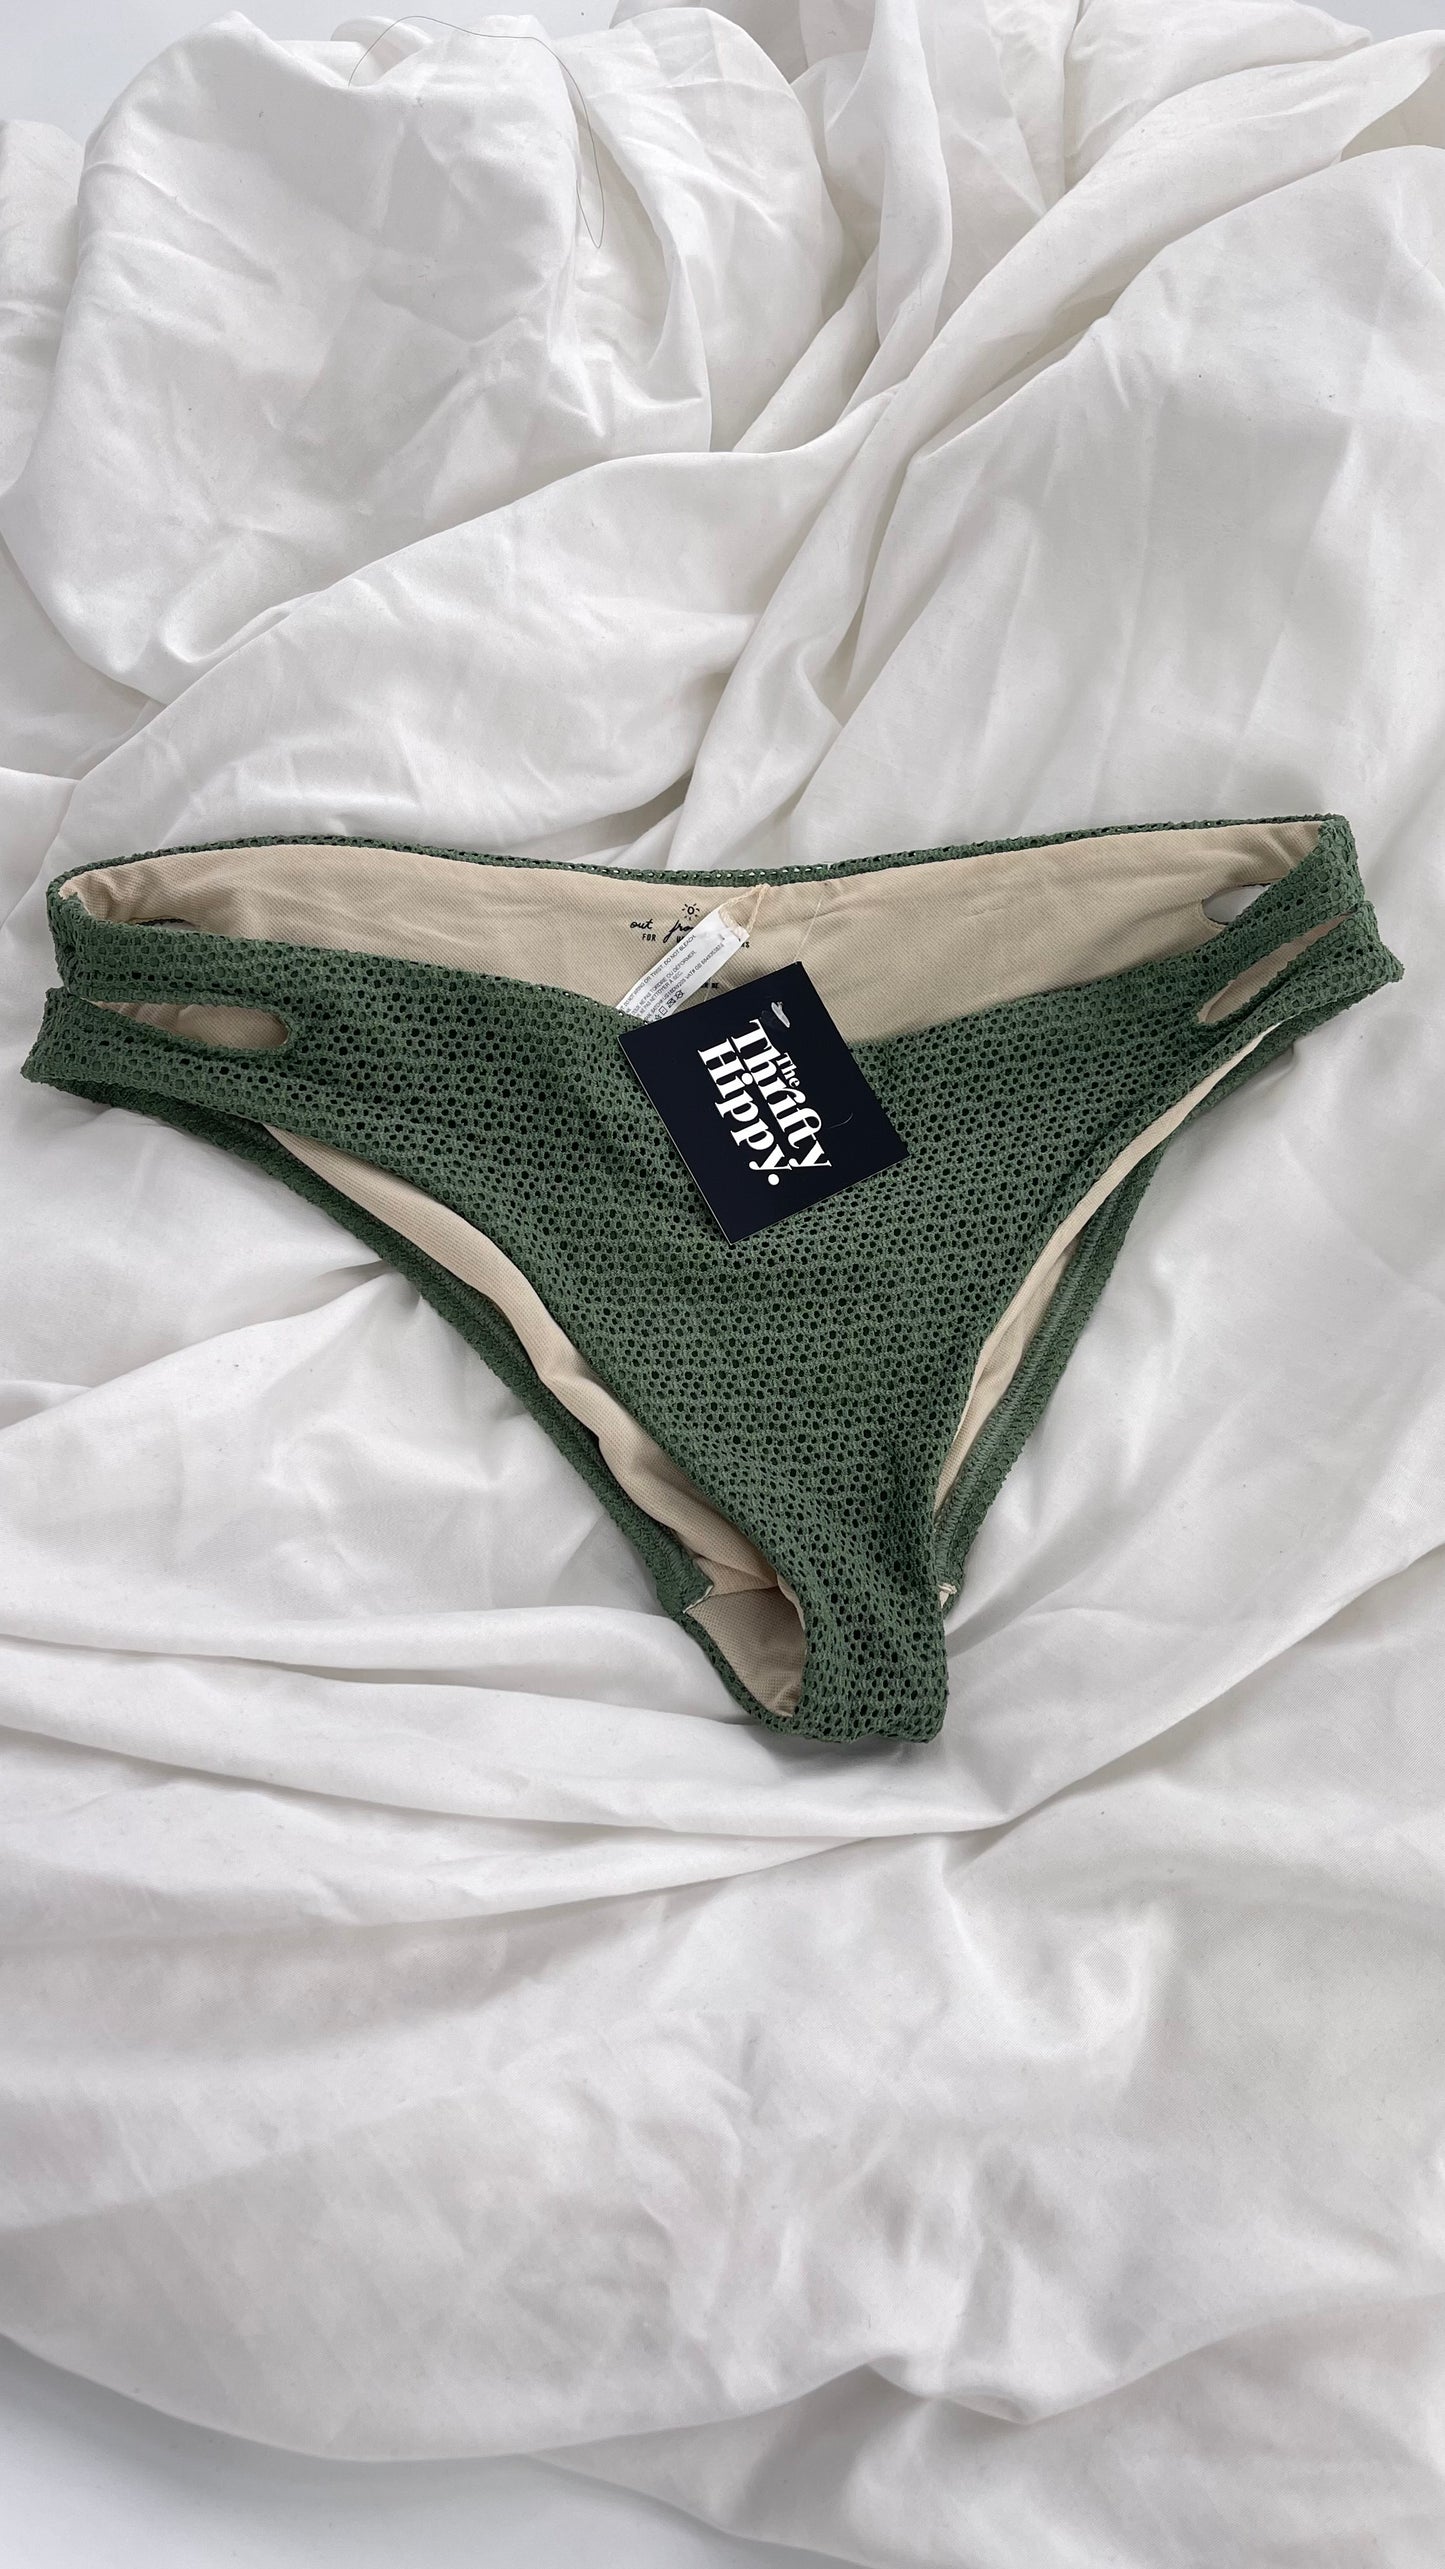 Urban Outfitters Out From Under Green Lacy Swim Bottoms (Medium)